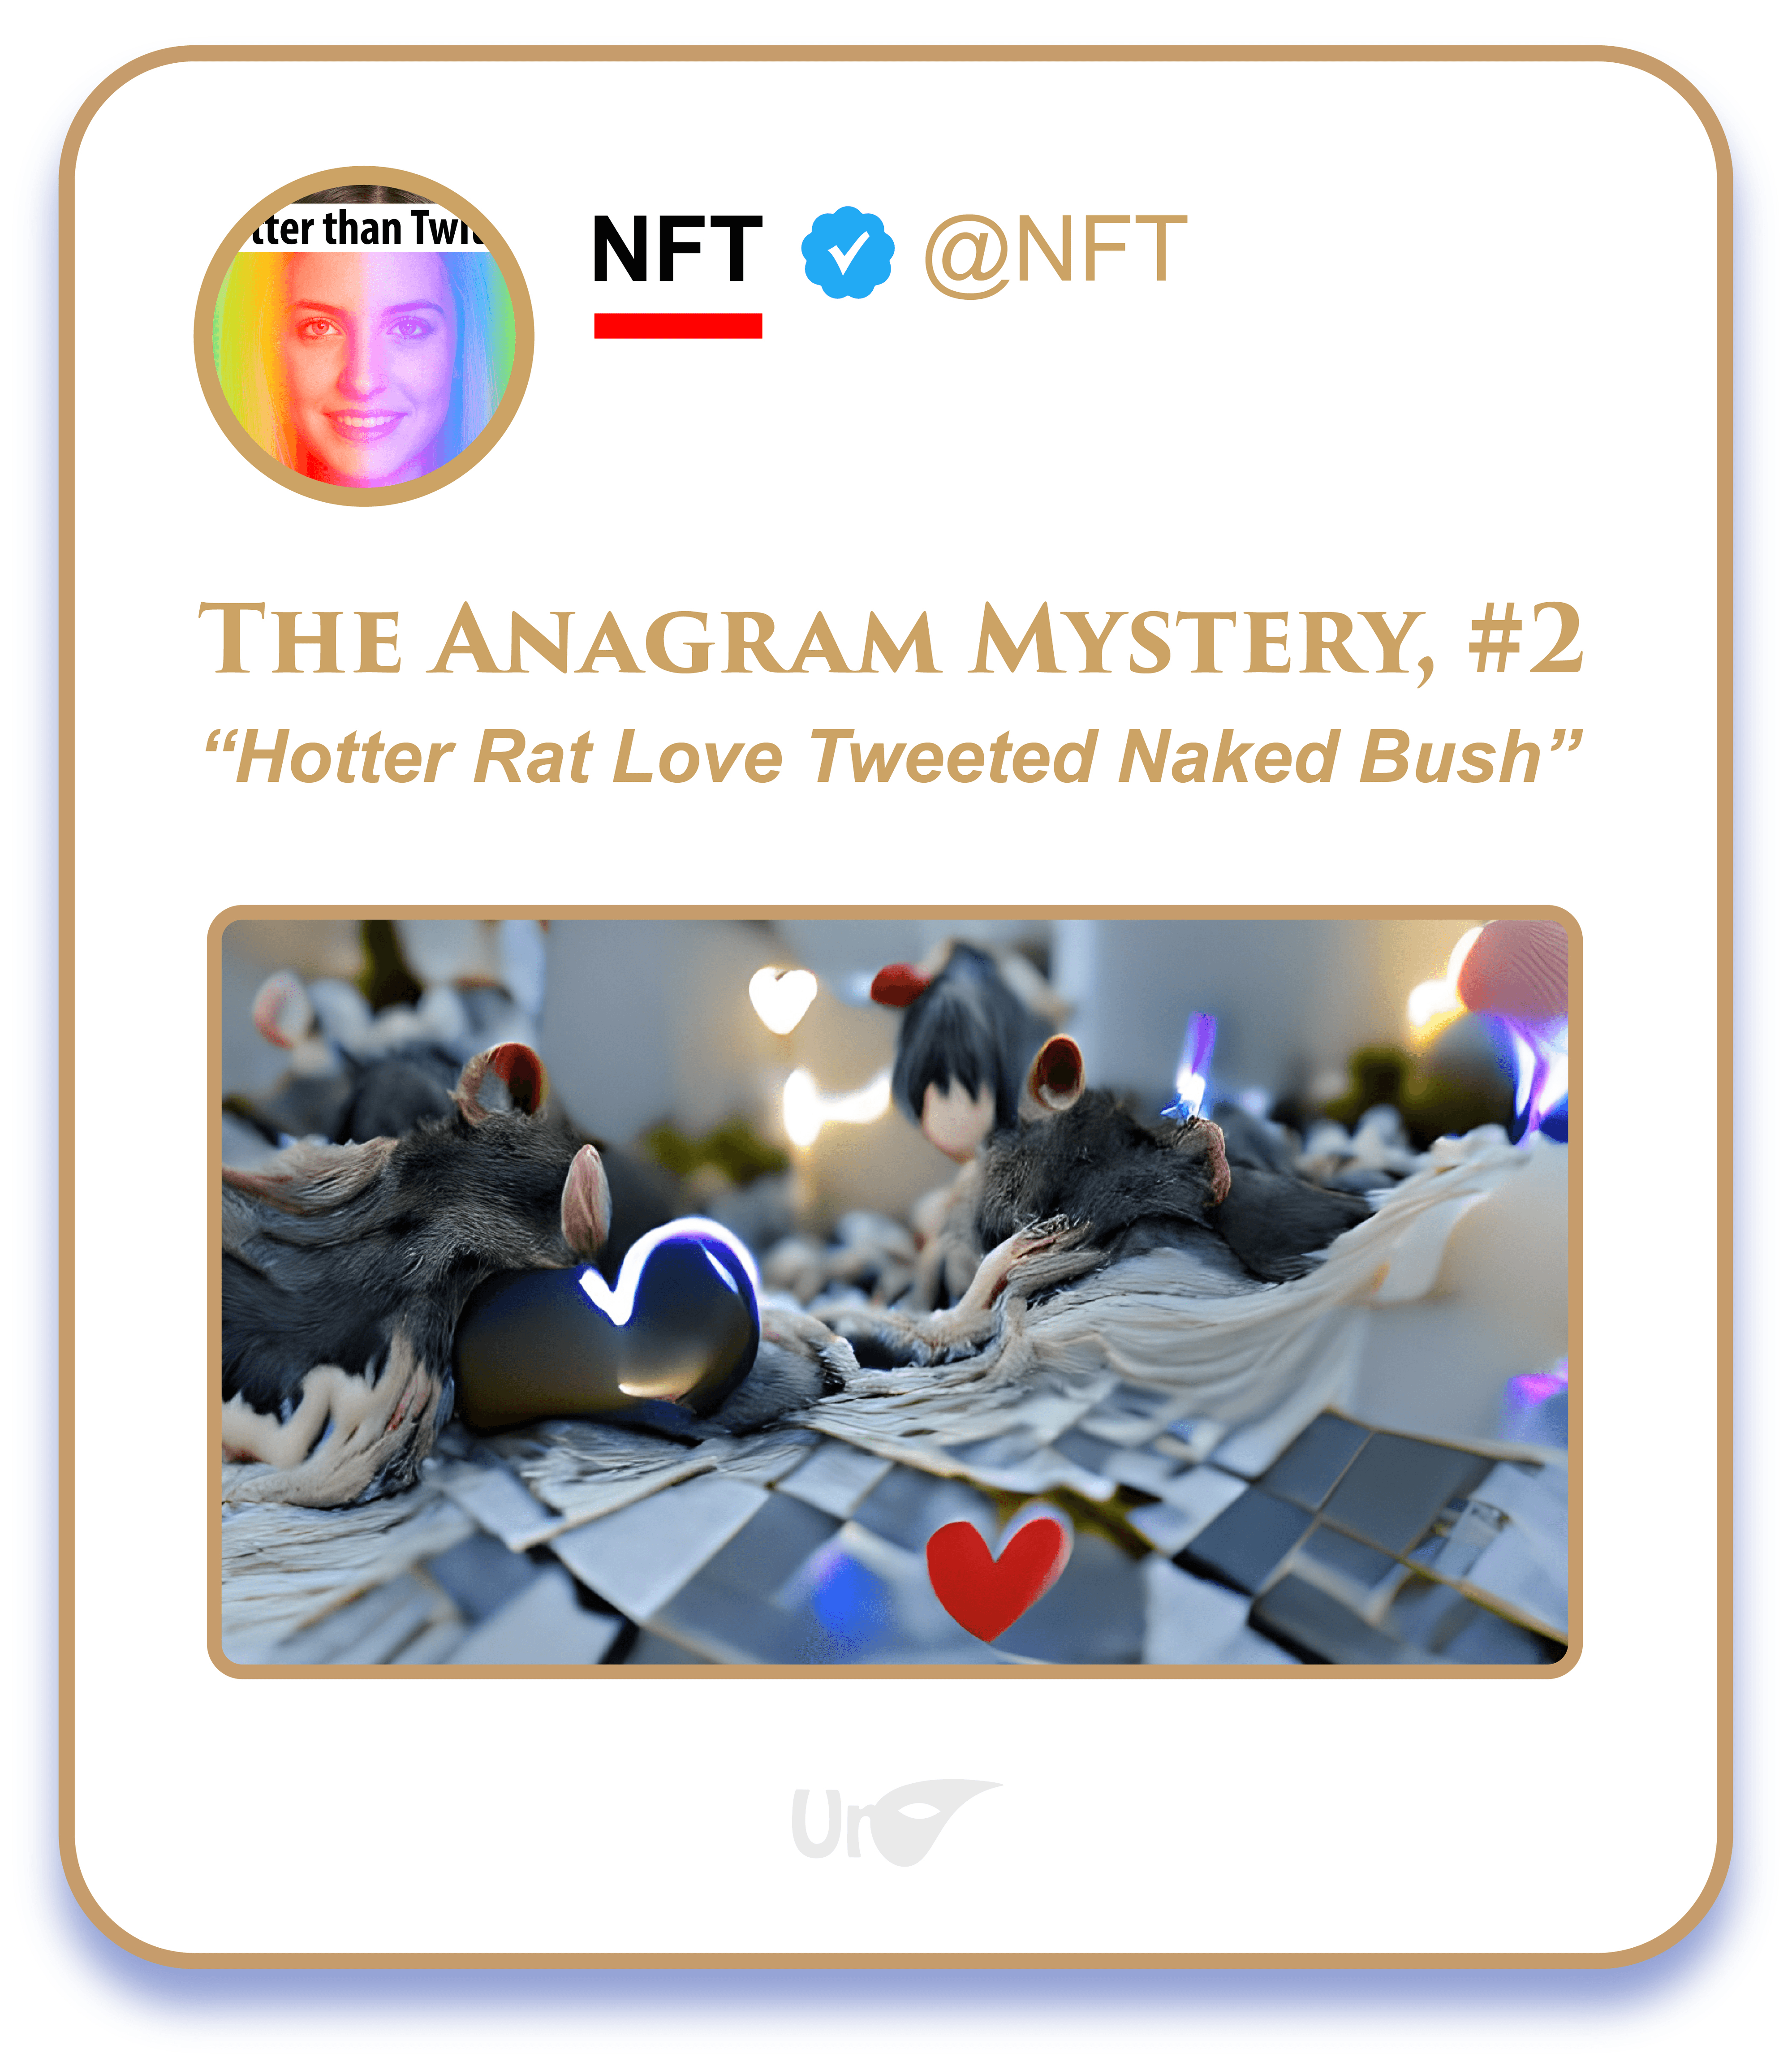 The Angram Mystery, #2: "Hotter Rat Love Tweeted Naked Bush"